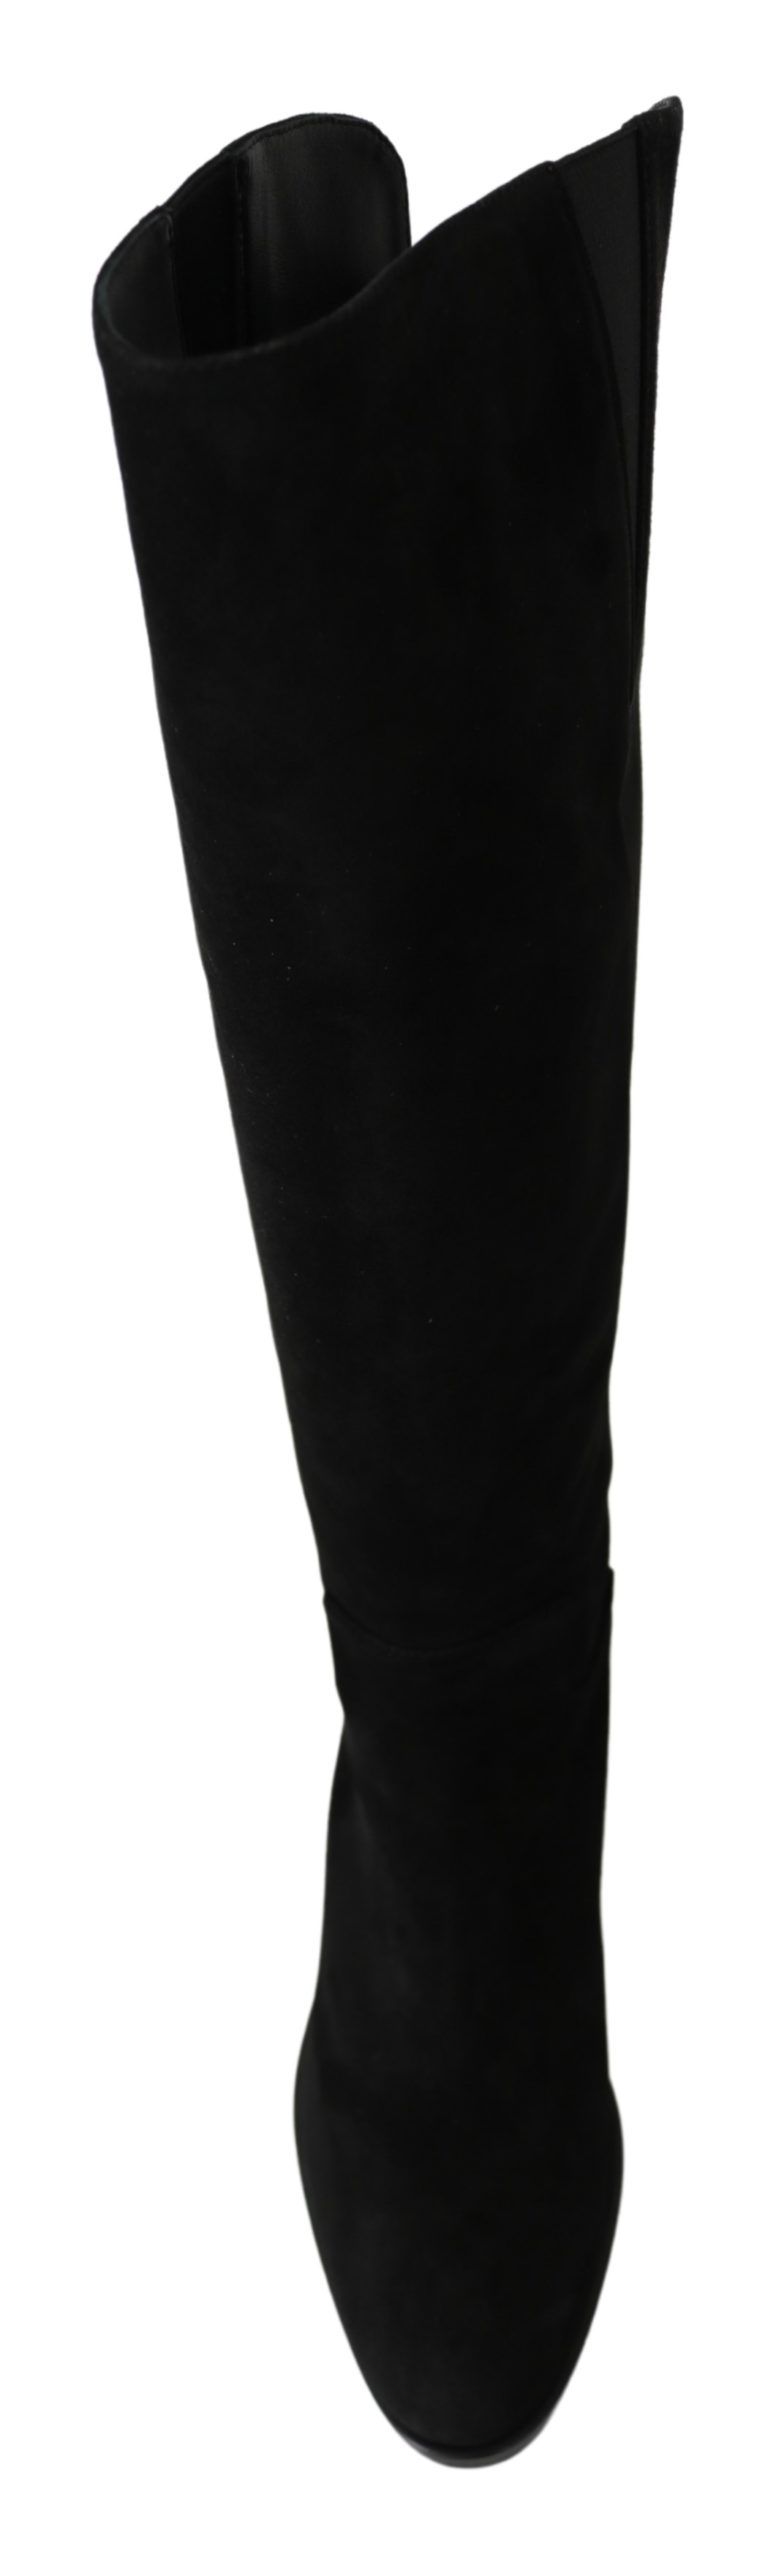 Dolce & Gabbana Black Suede Knee High Flat Boots Shoes